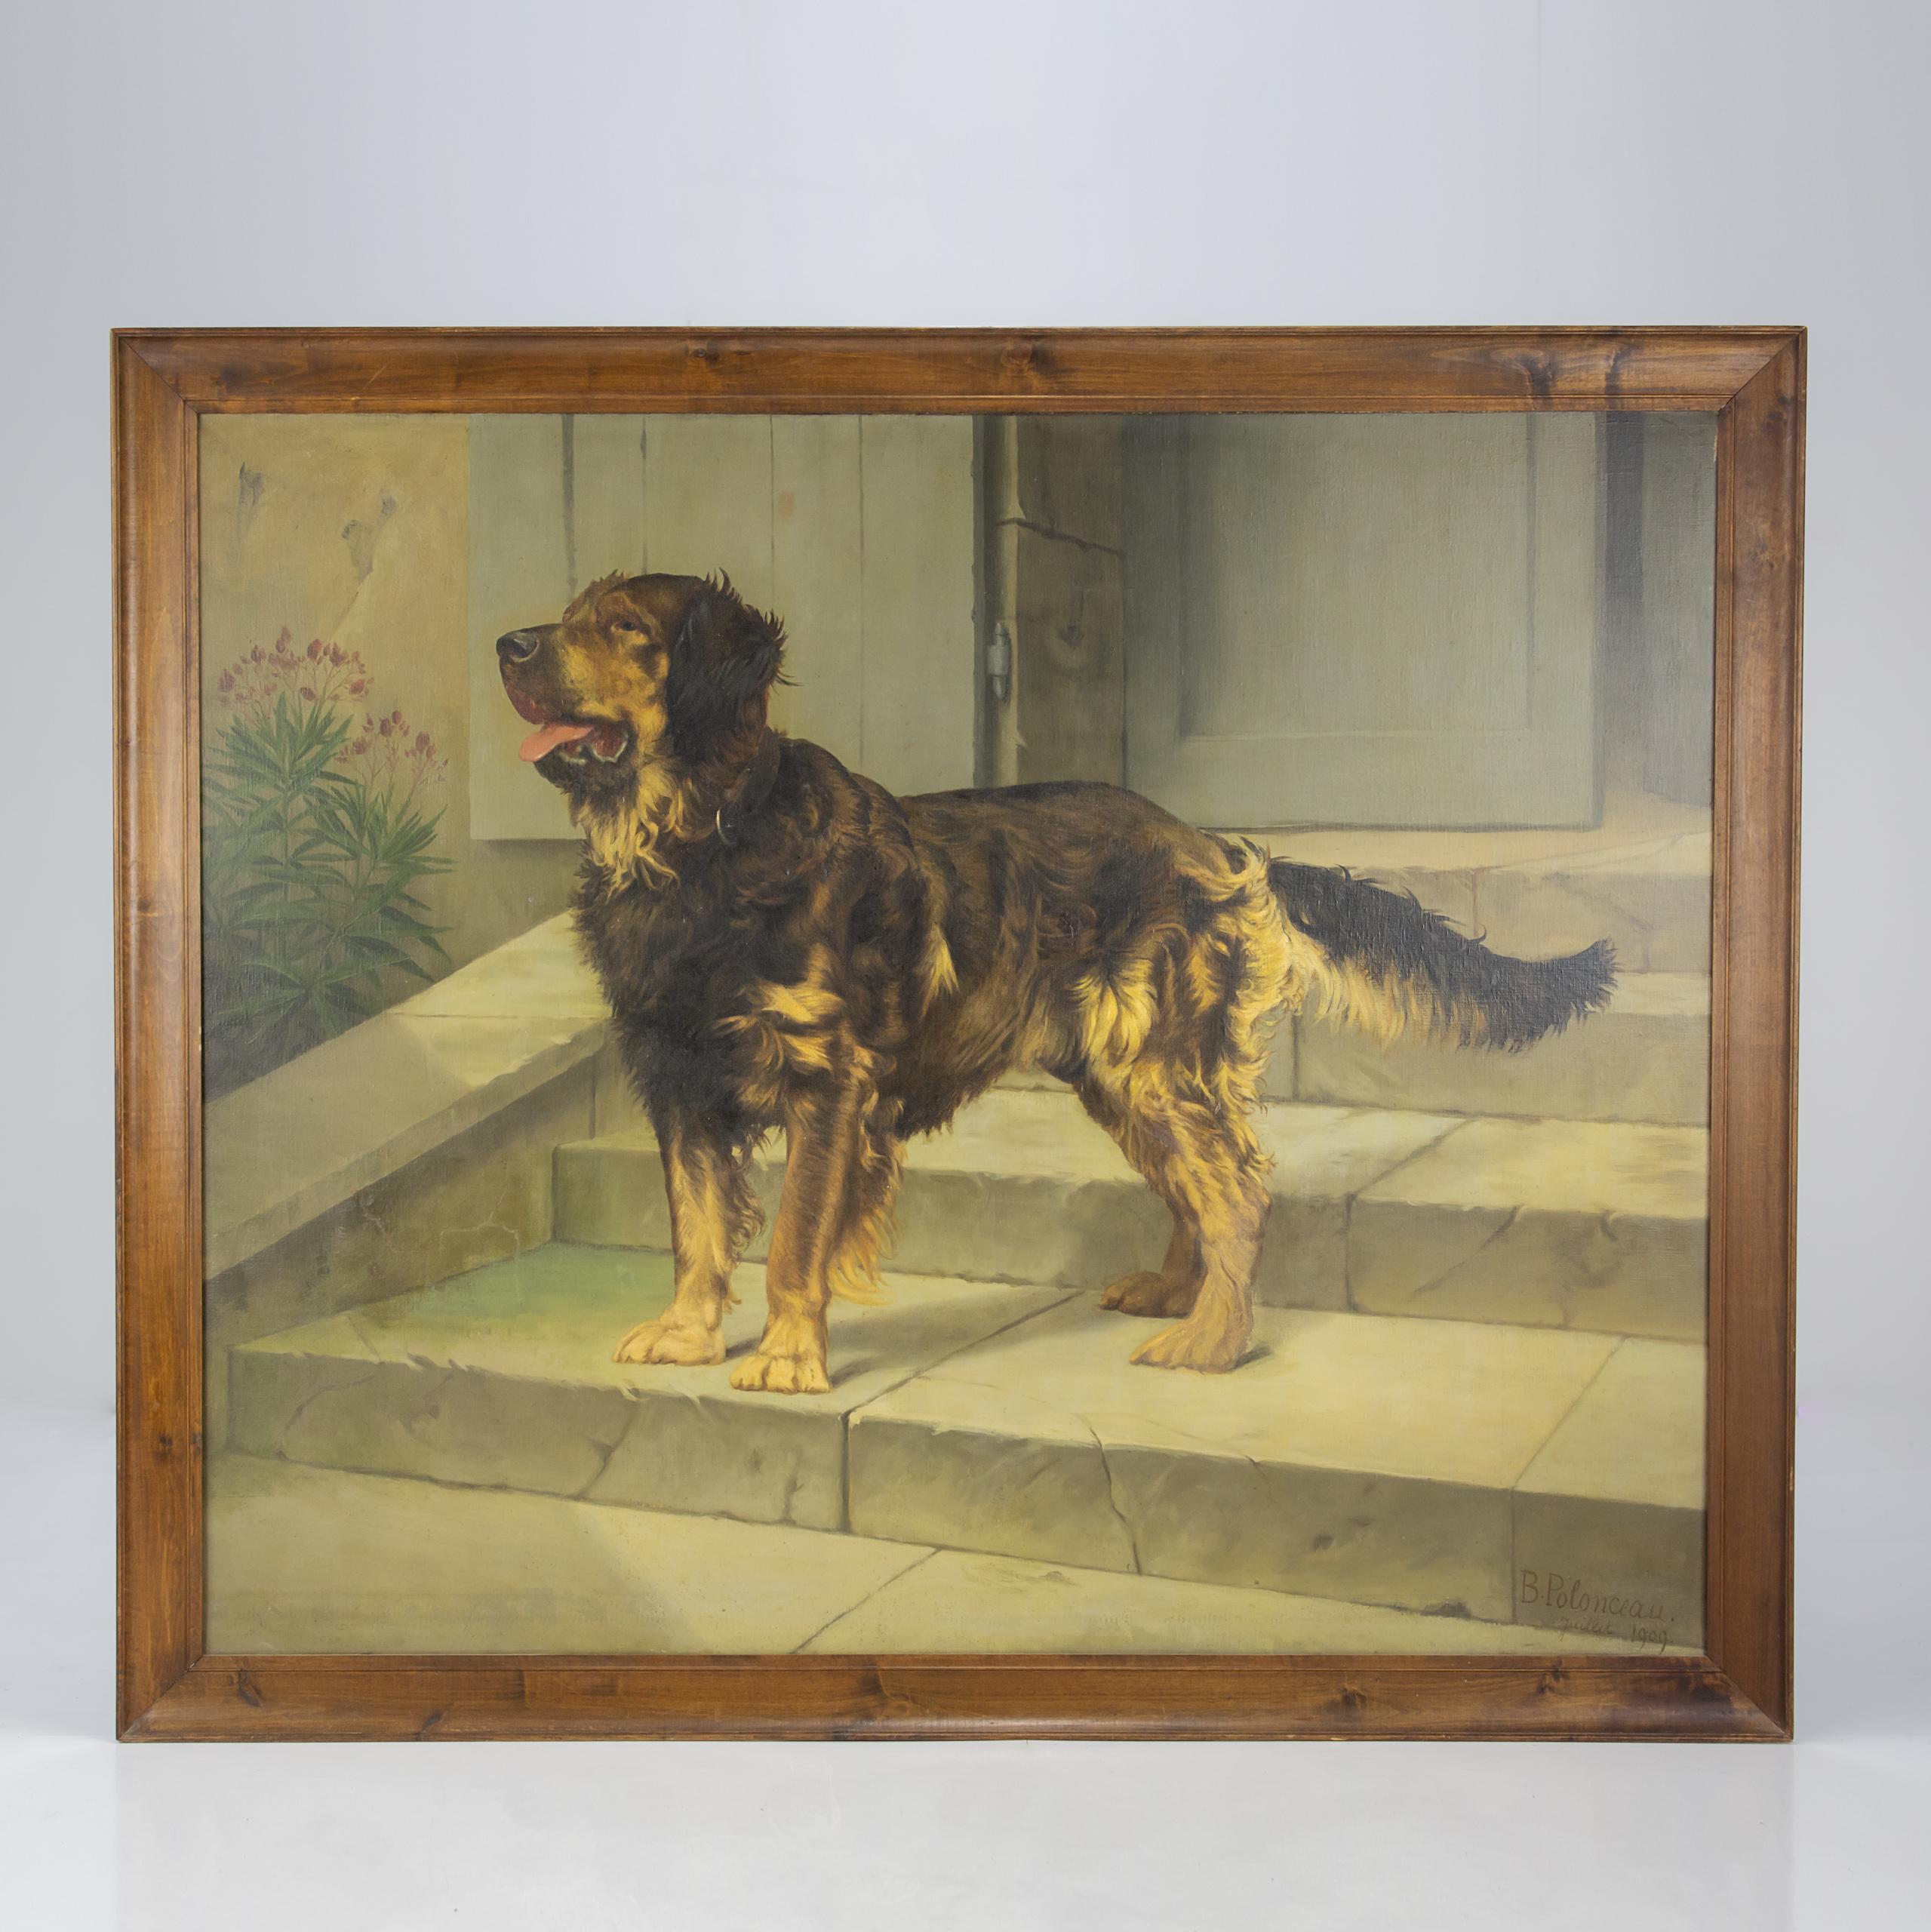 Huge Oil on Canvas Dog Portait by Blanche Polonceau (1846 - 1914) Dated 1909.

Large Early 20th Century oil on canvas portrait of a English Sheperd Dog. Captured on the steps of the house. by Female artist Blanche Polonceau. Signed and dated